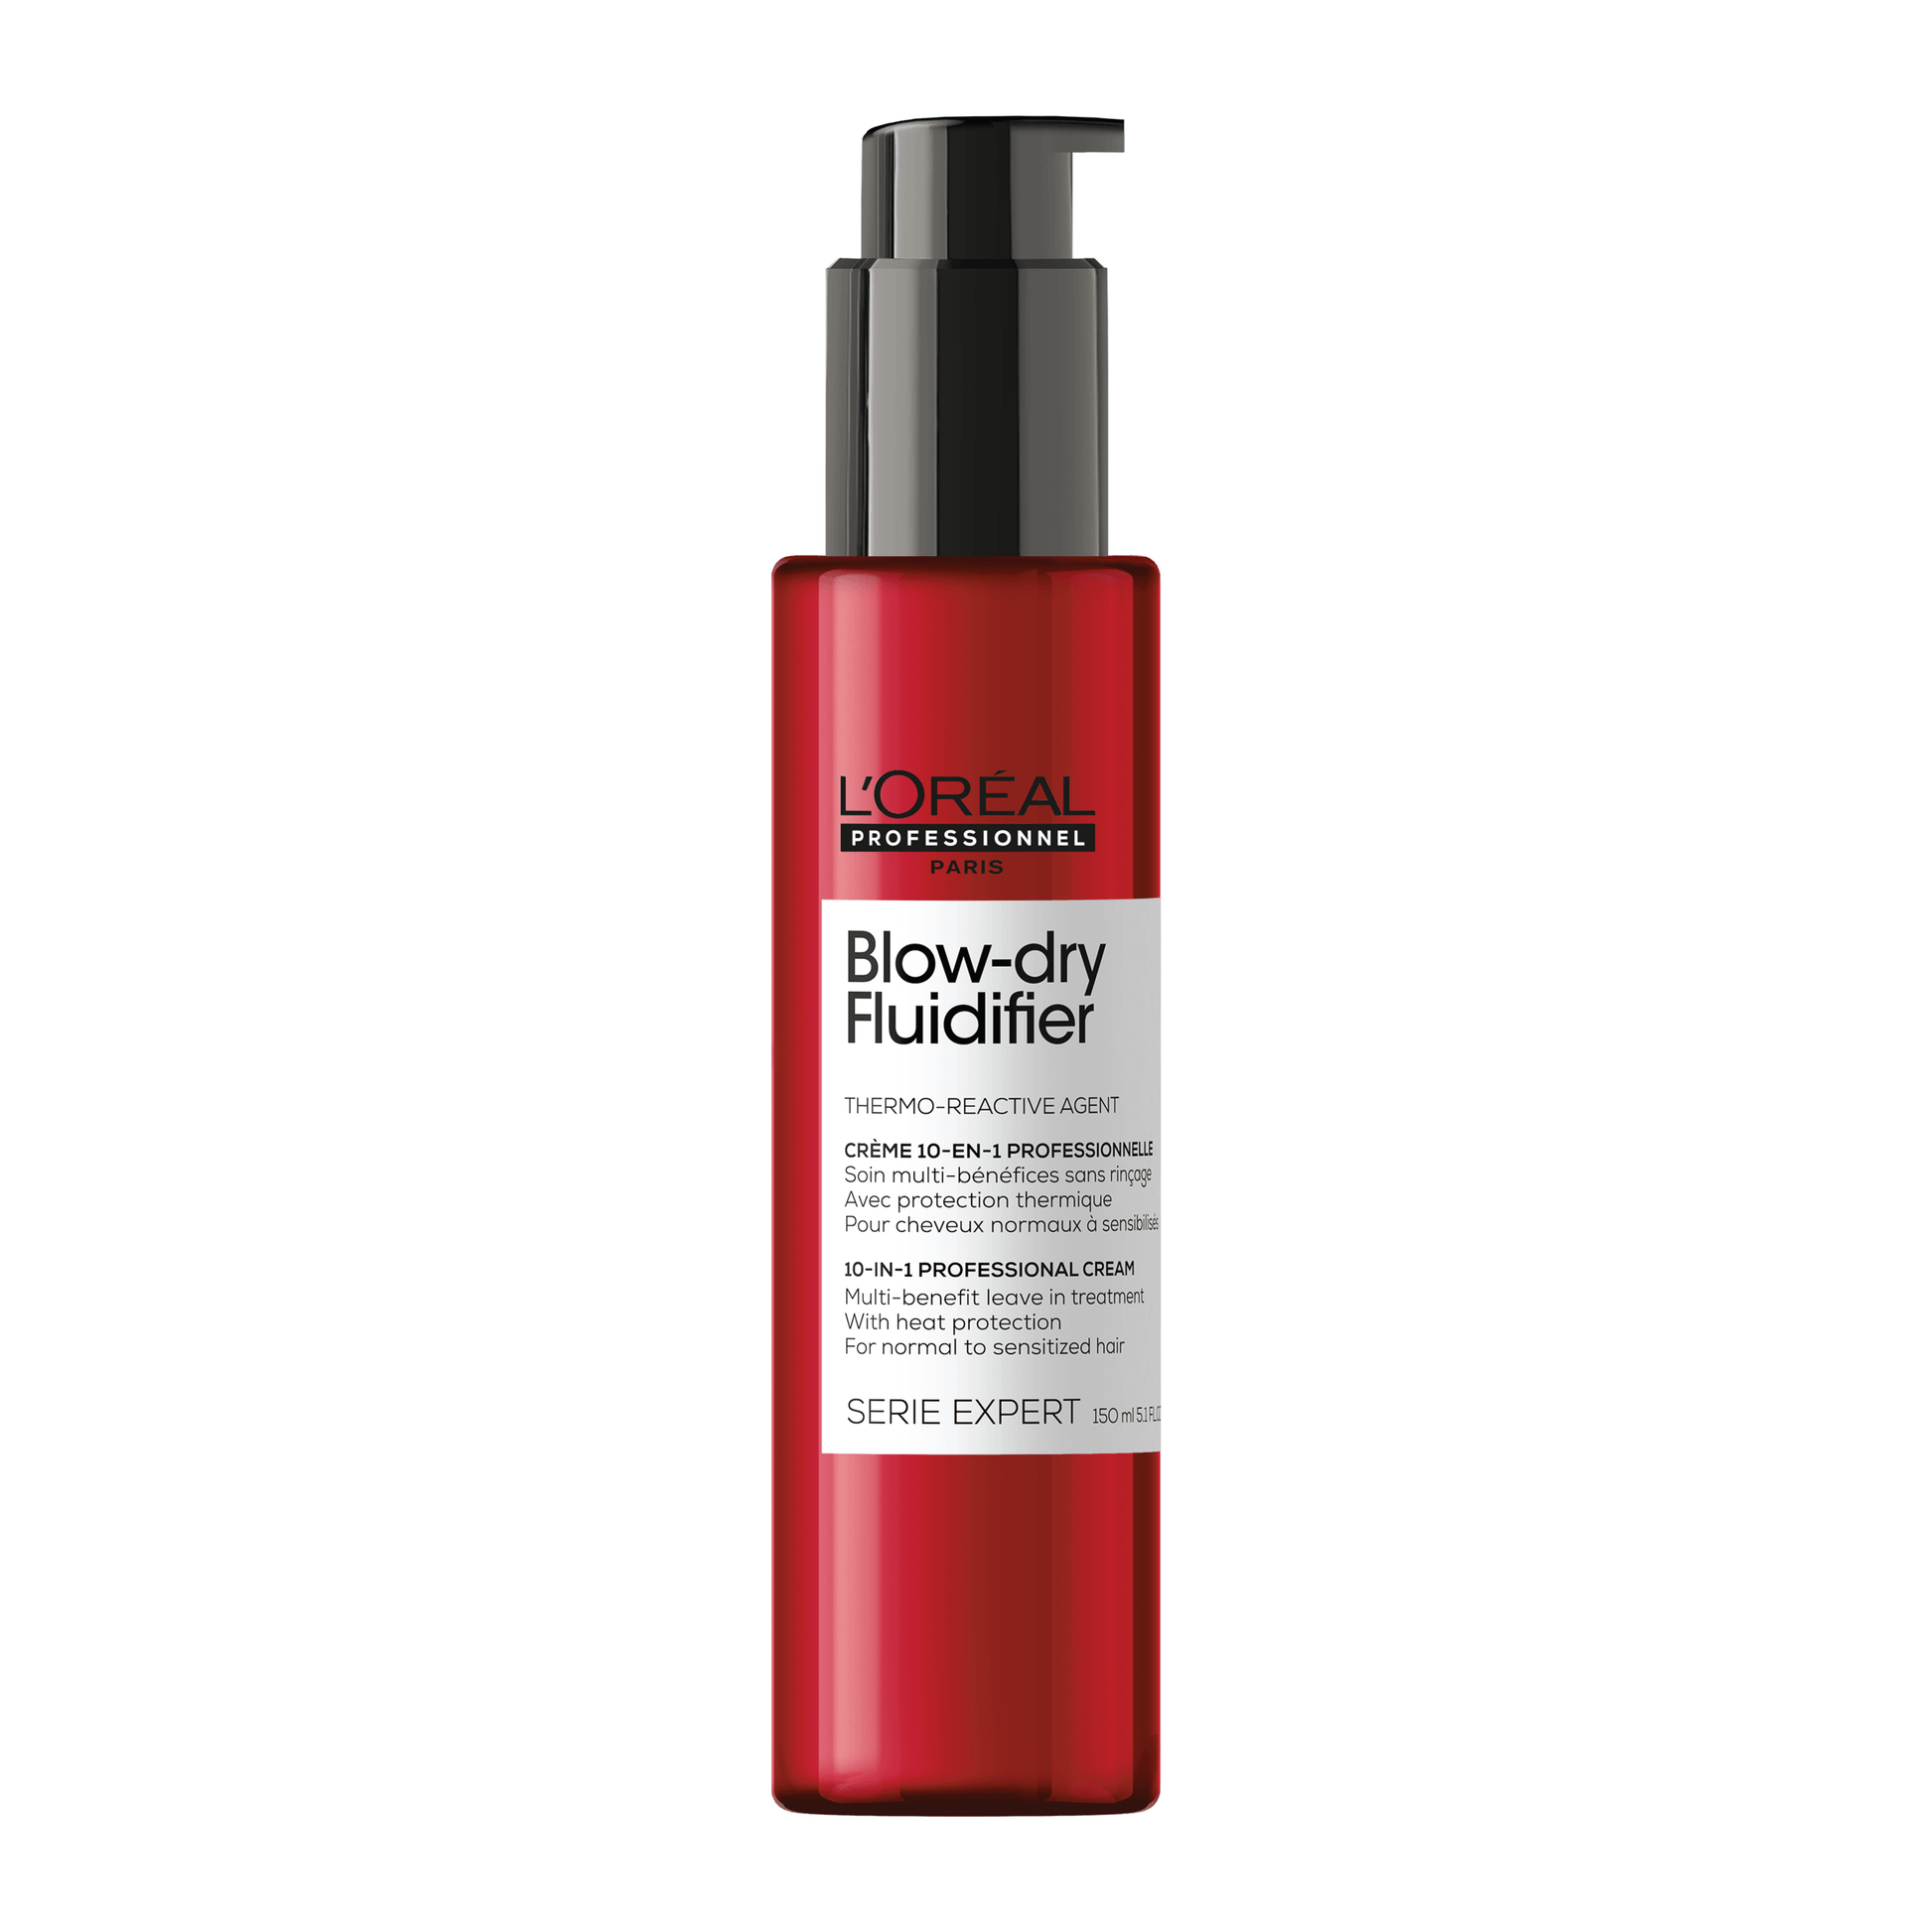 L’oreal Professional Serie Expert Blow Dry Fluidifier 150ml